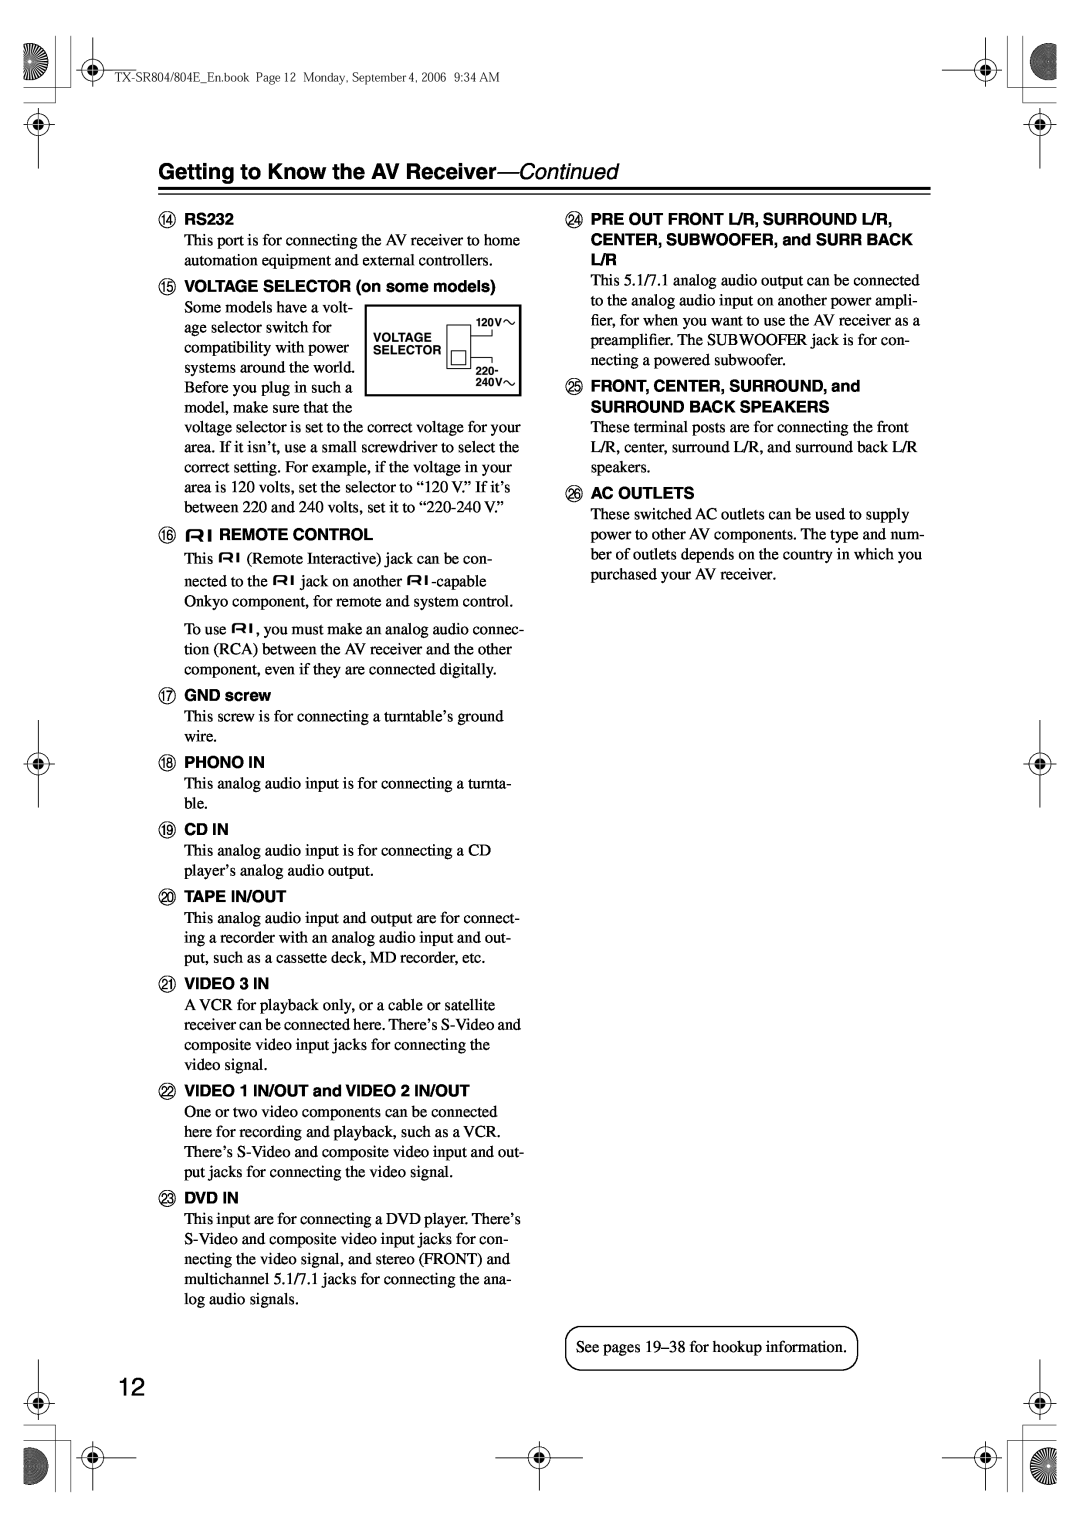 Onkyo TX-SR804E instruction manual Getting to Know the AV Receiver—Continued, NRS232 